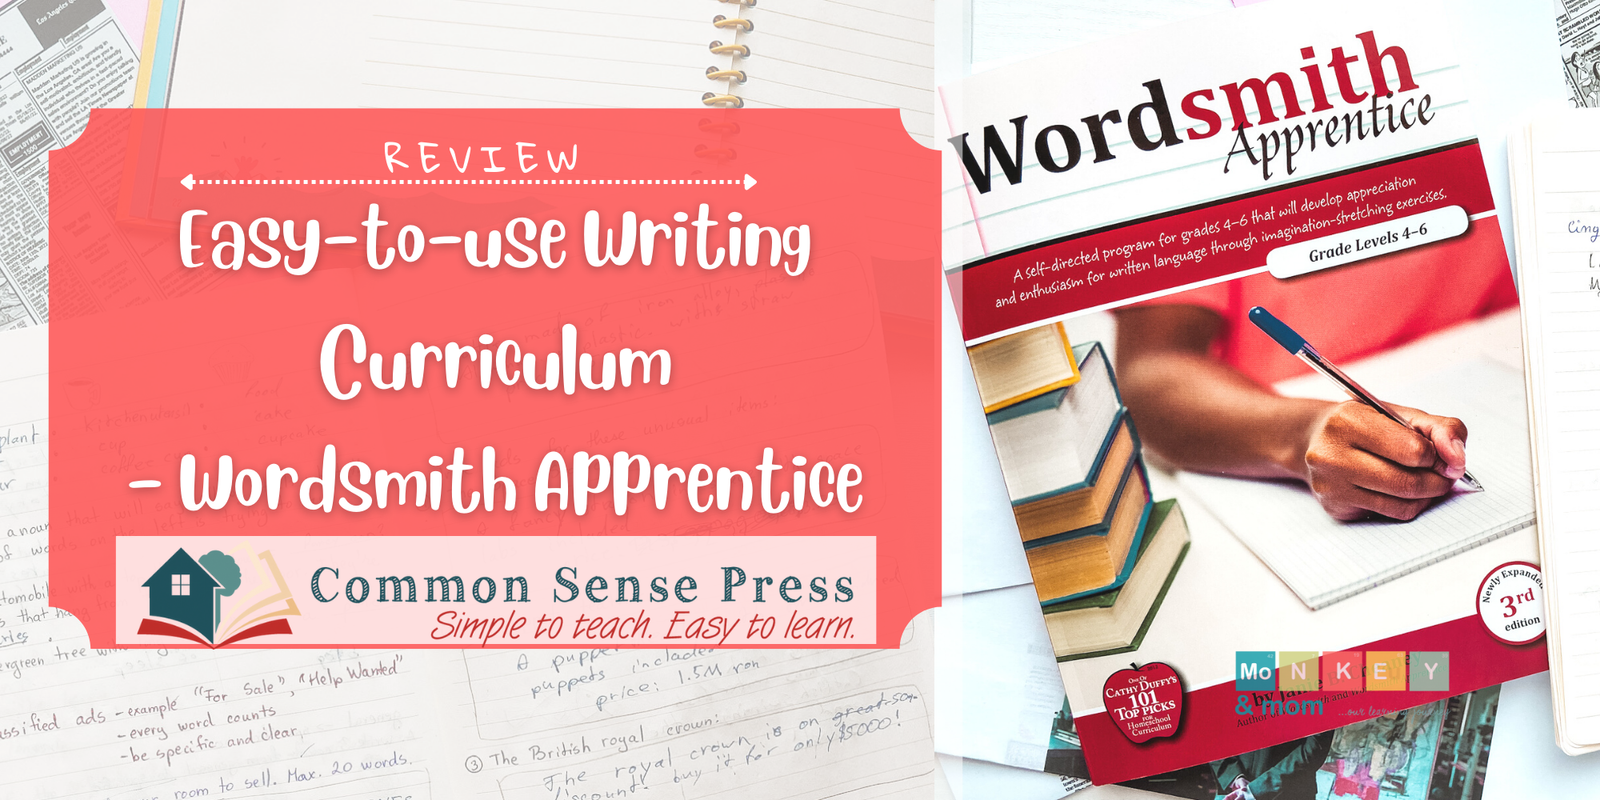 Easy-to-use Writing Curriculum by Common Sense Press- Wordsmith Apprentice Review